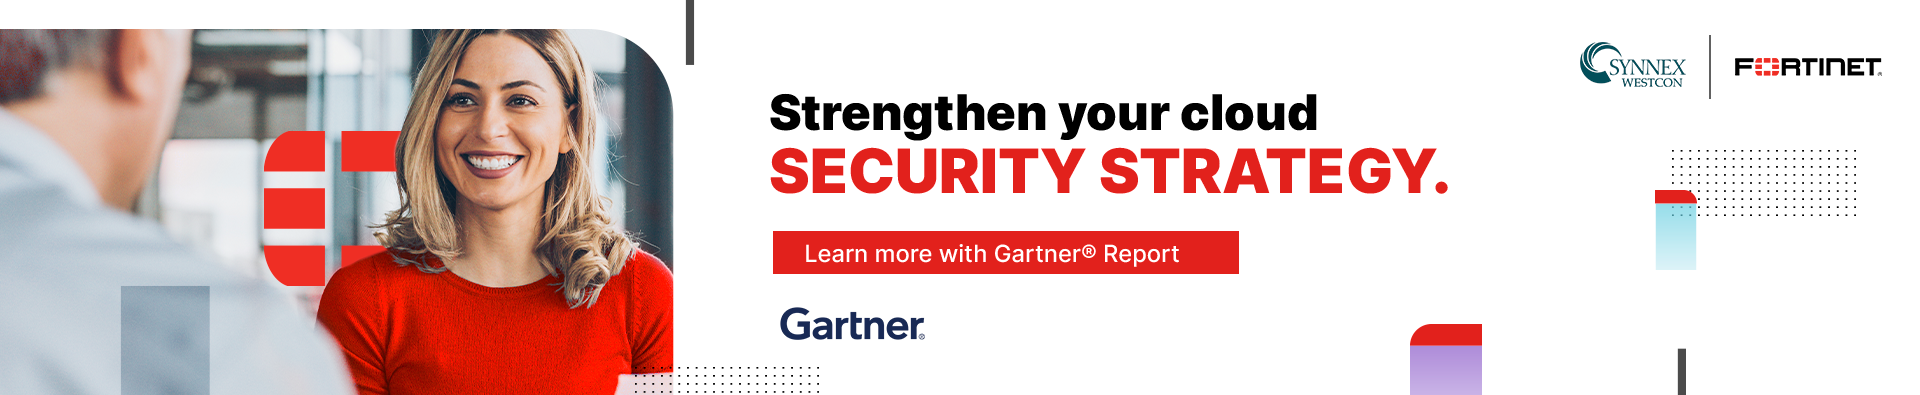 Learn more with Gartner Report